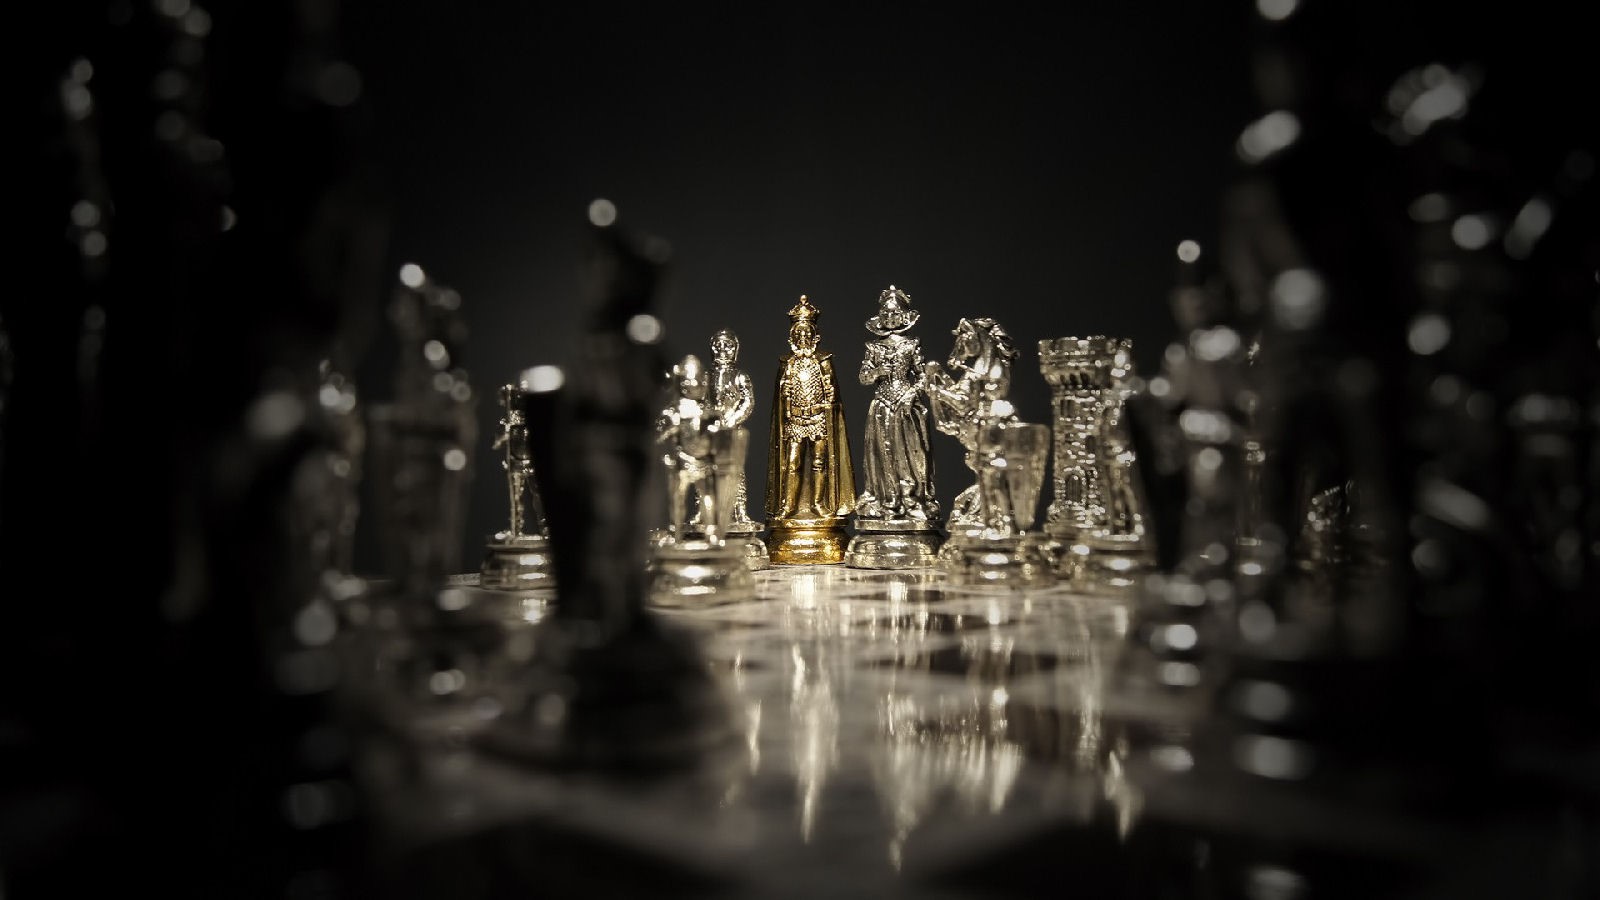 Wallpaper / chess, Gamer, king, parts, tower, horse, pawns, silver, gold, queen (royalty) free download